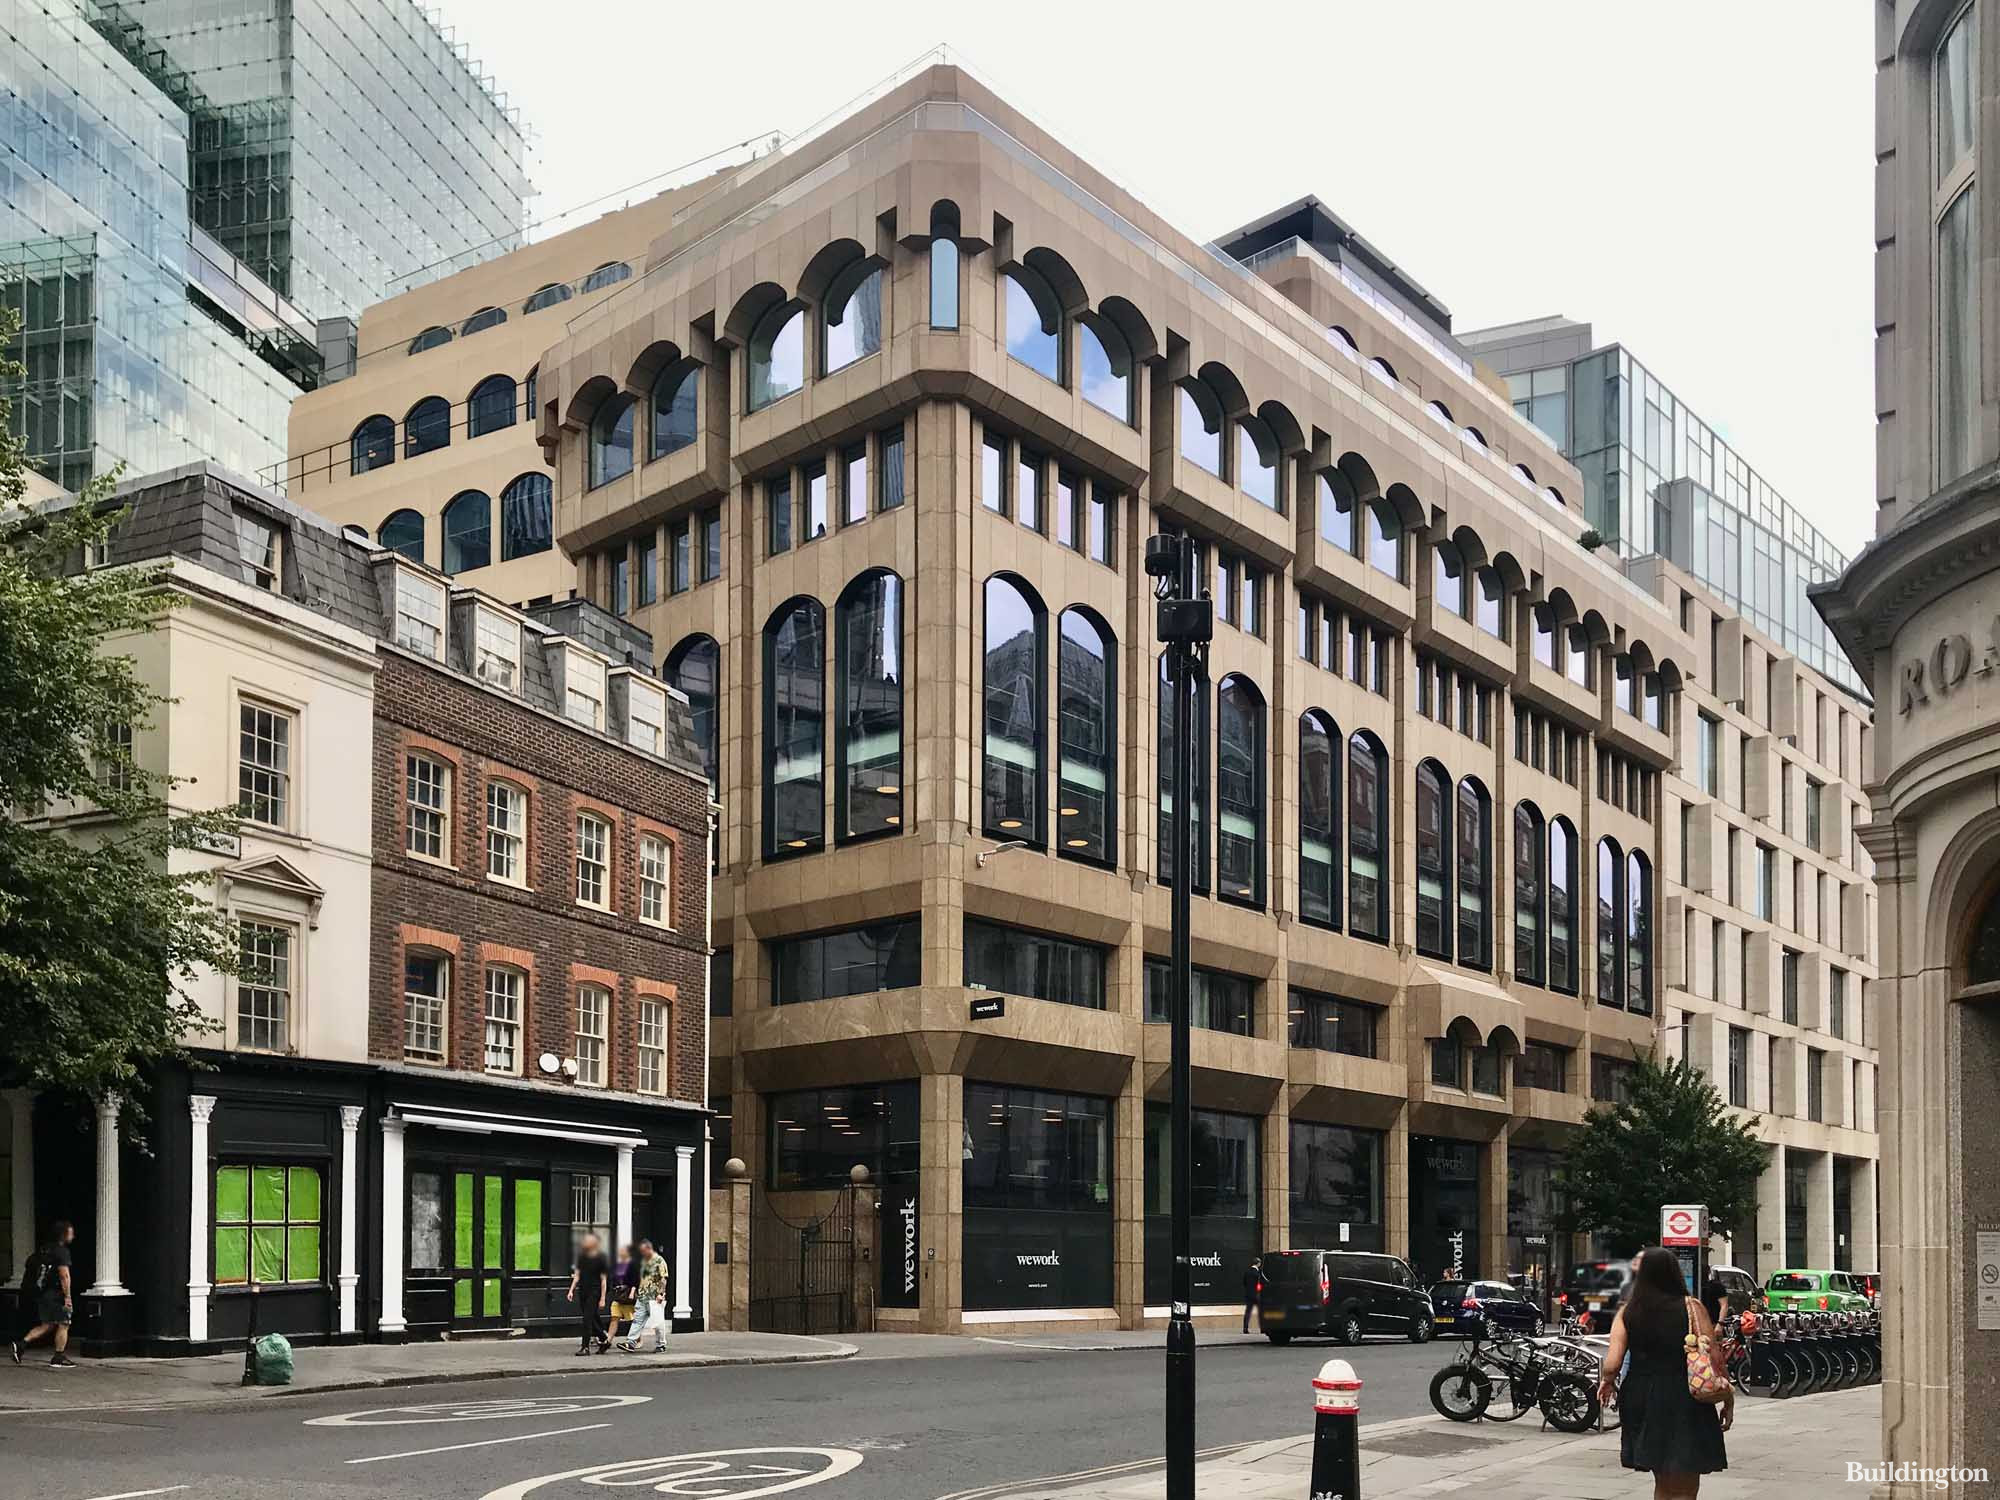 WeWork's offices at 51 Eastcheap in the City of London EC3.